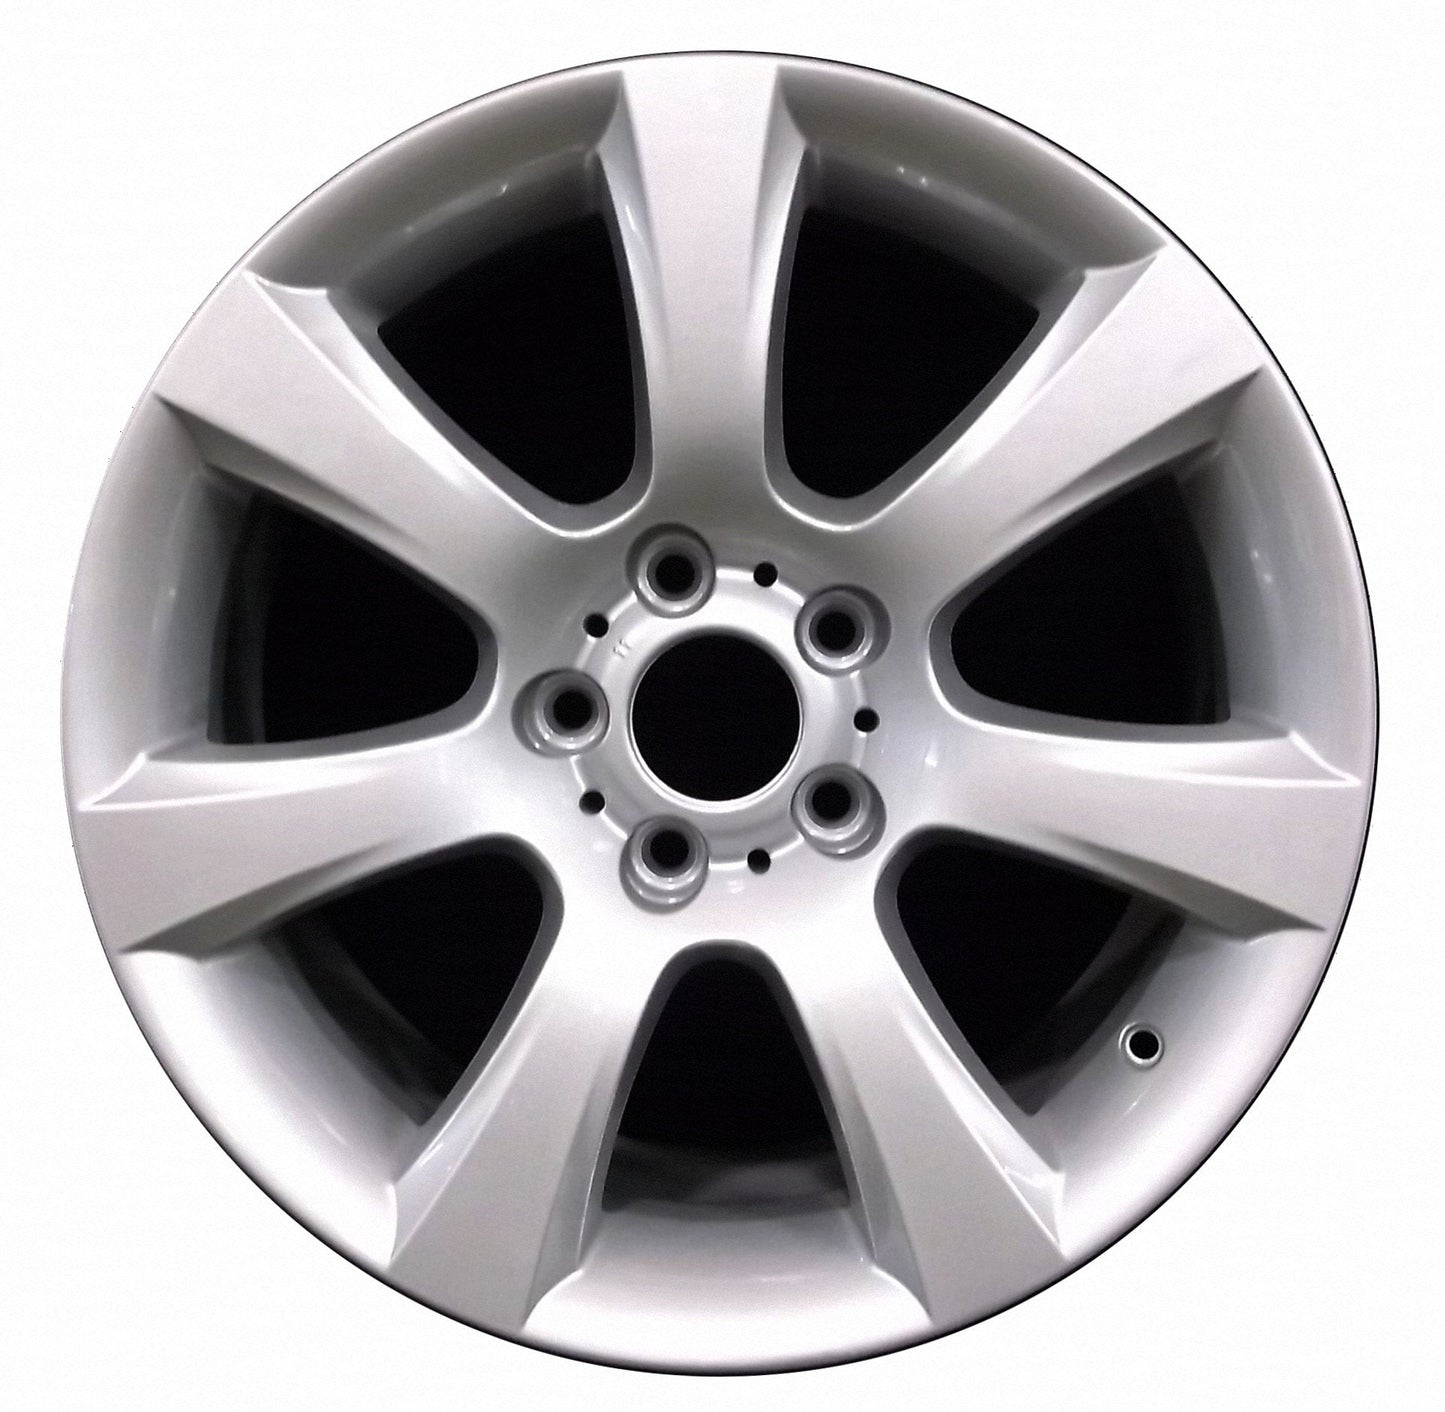 BMW 535i  2011, 2012, 2013, 2014, 2015, 2016 Factory OEM Car Wheel Size 18x8 Alloy WAO.71405FT.PS10.FF